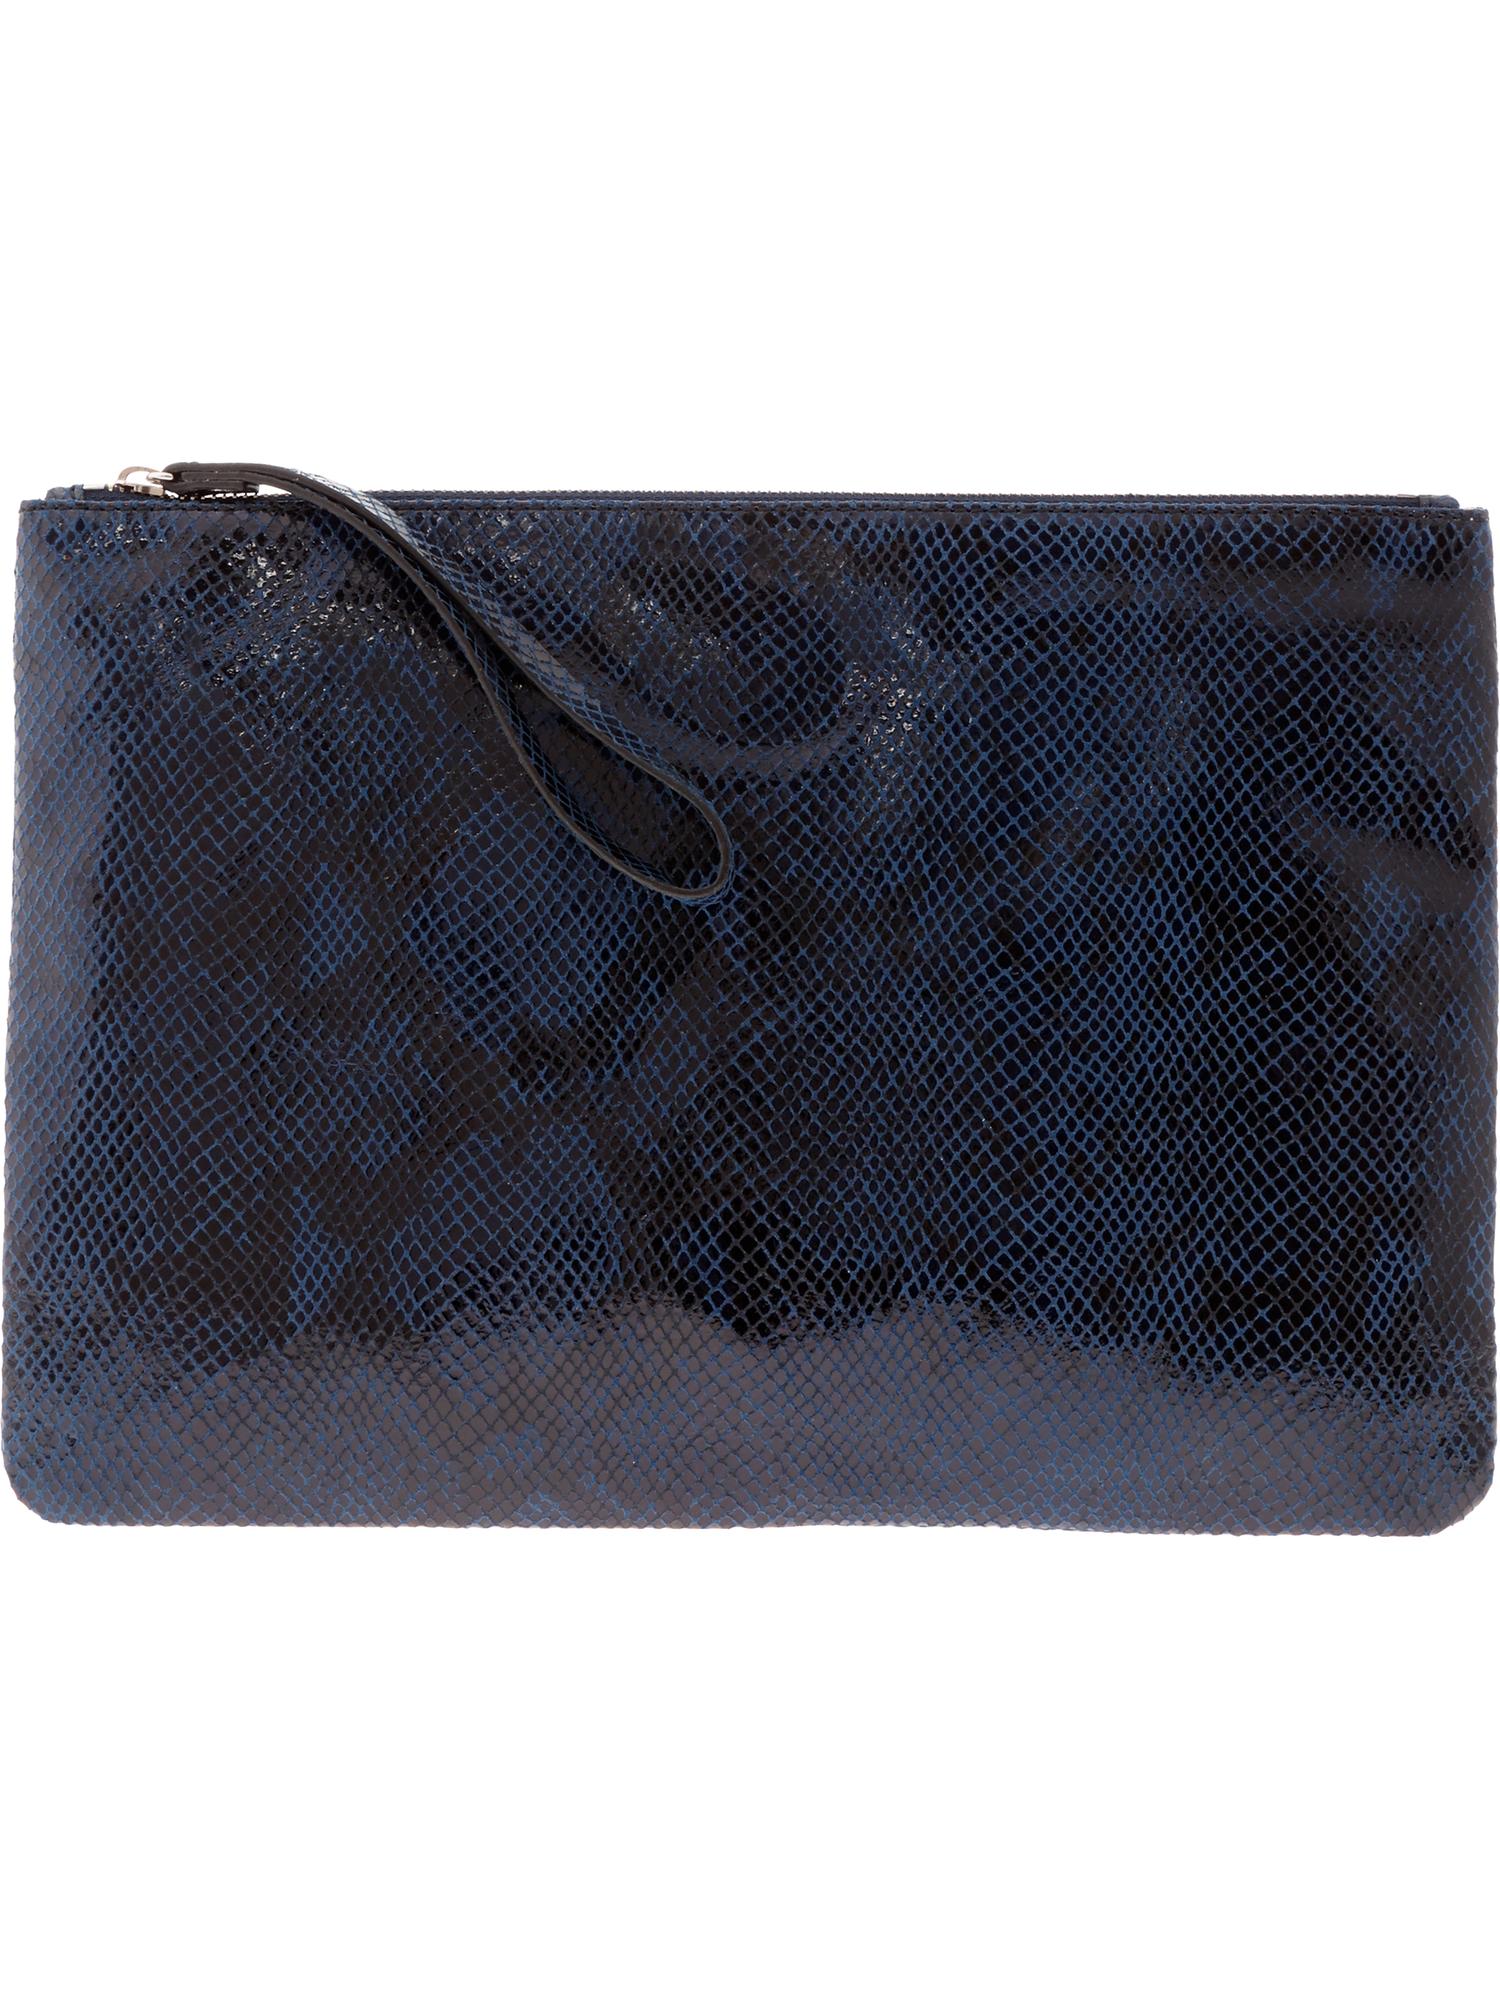 Python Embossed Oversized Clutch